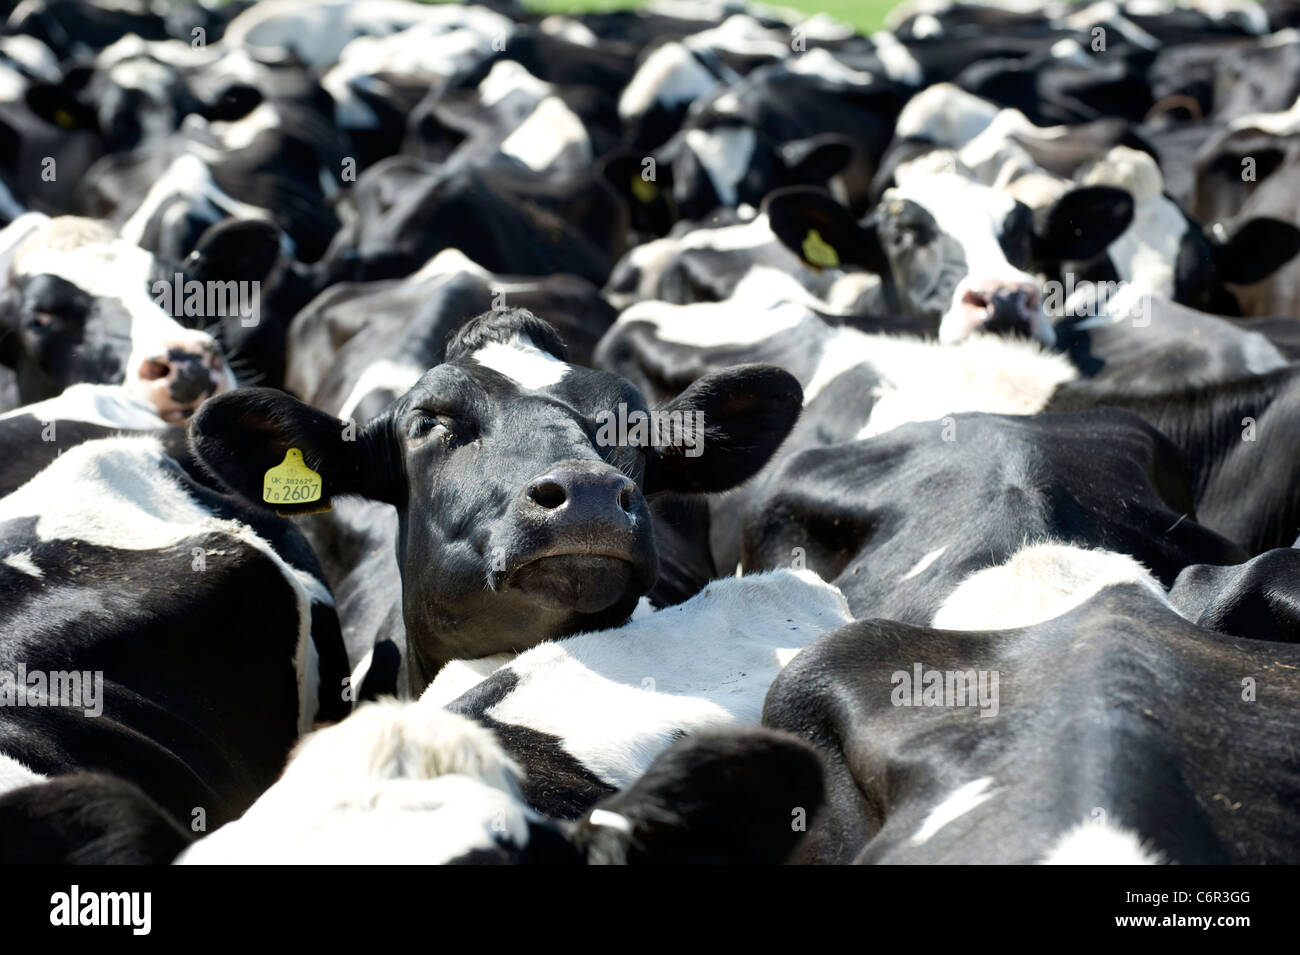 Tagged Friesian cow looking directly at camera Stock Photo